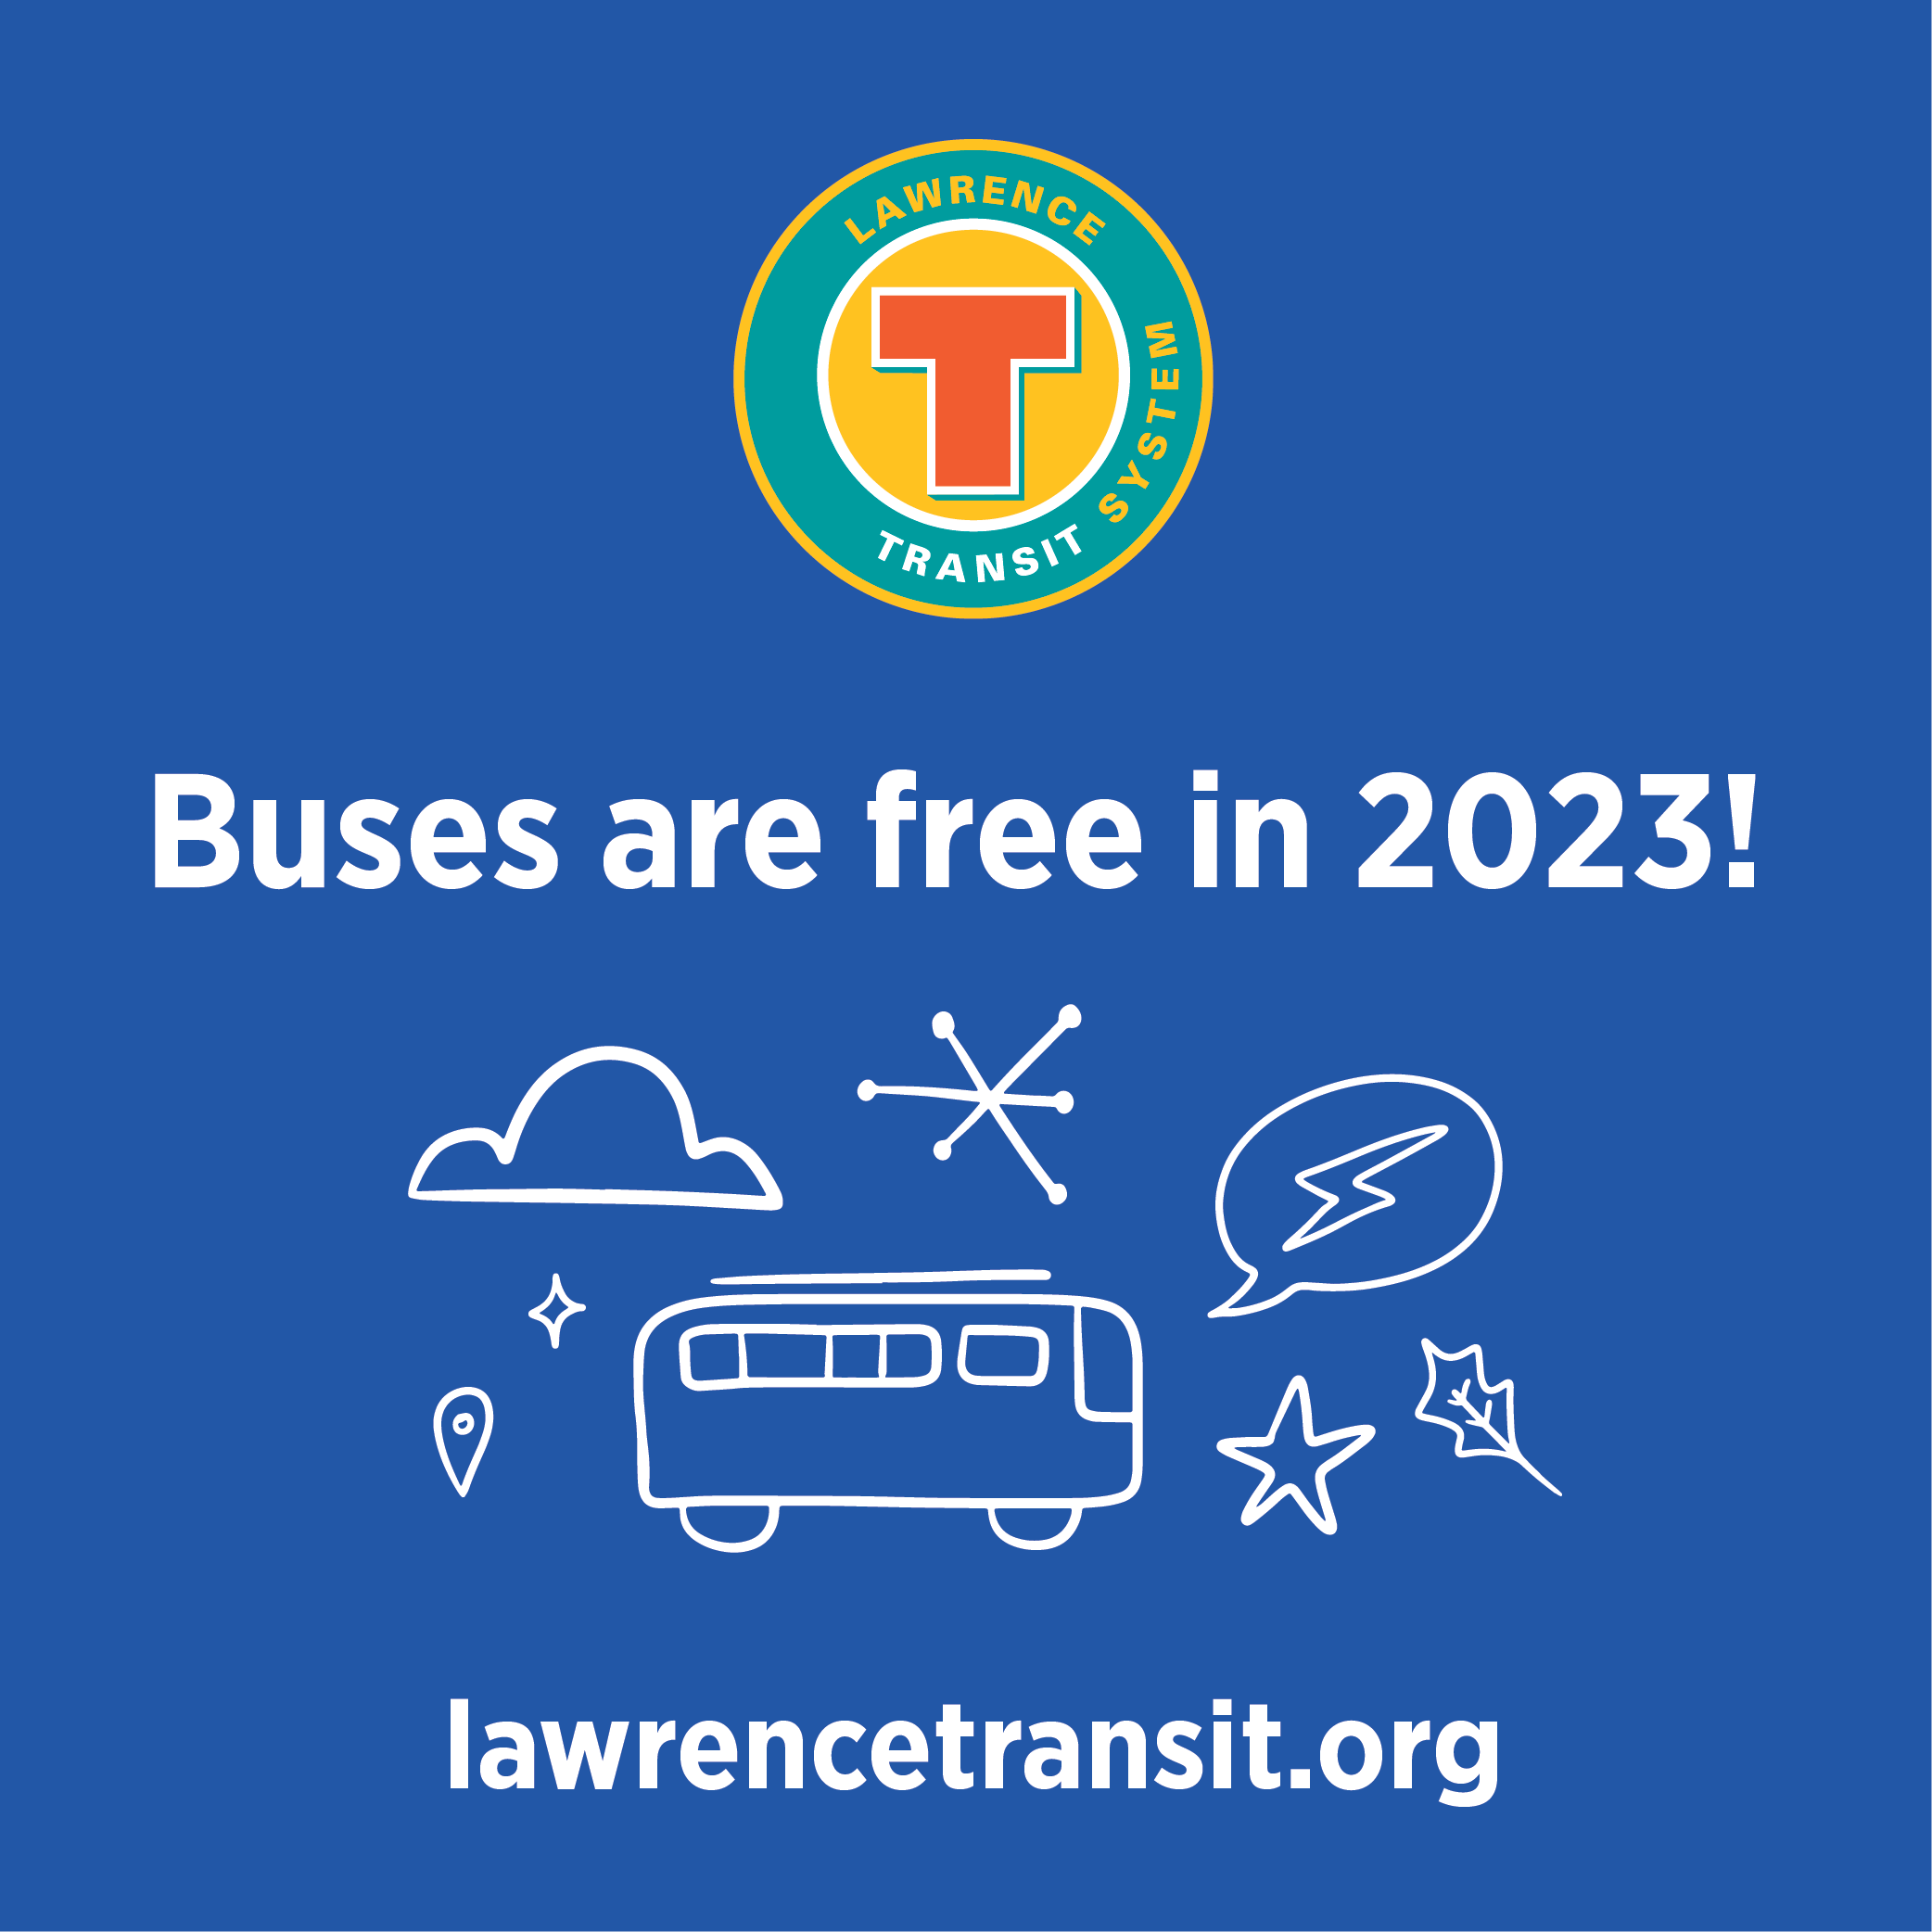 Featured image for “Lawrence Transit is Fare Free in 2023!”